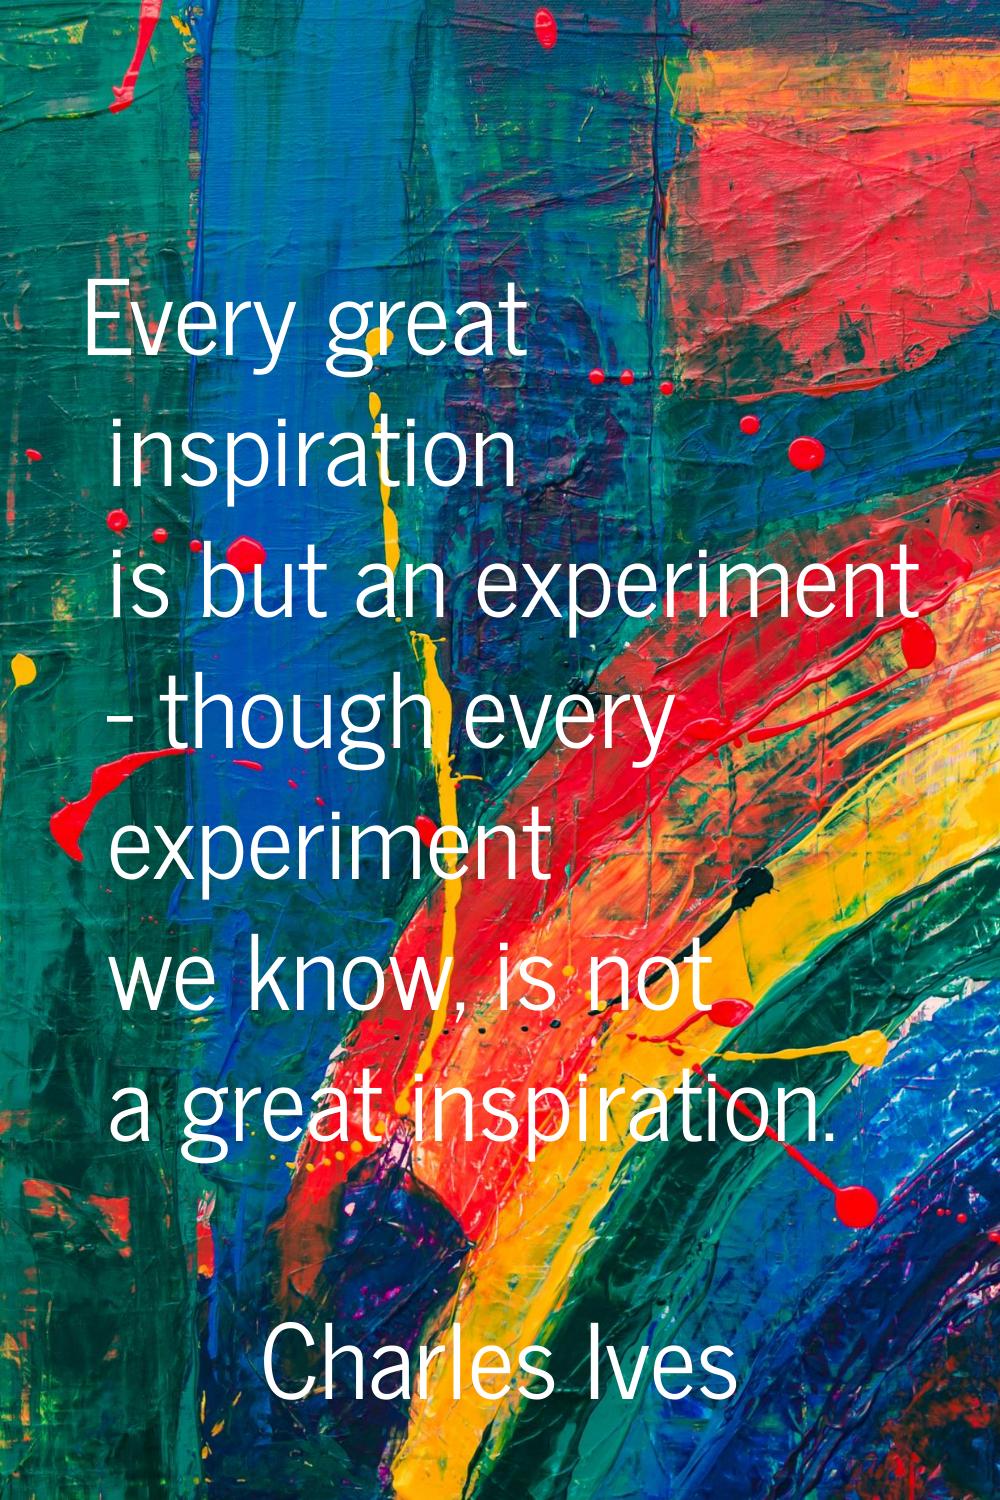 Every great inspiration is but an experiment - though every experiment we know, is not a great insp